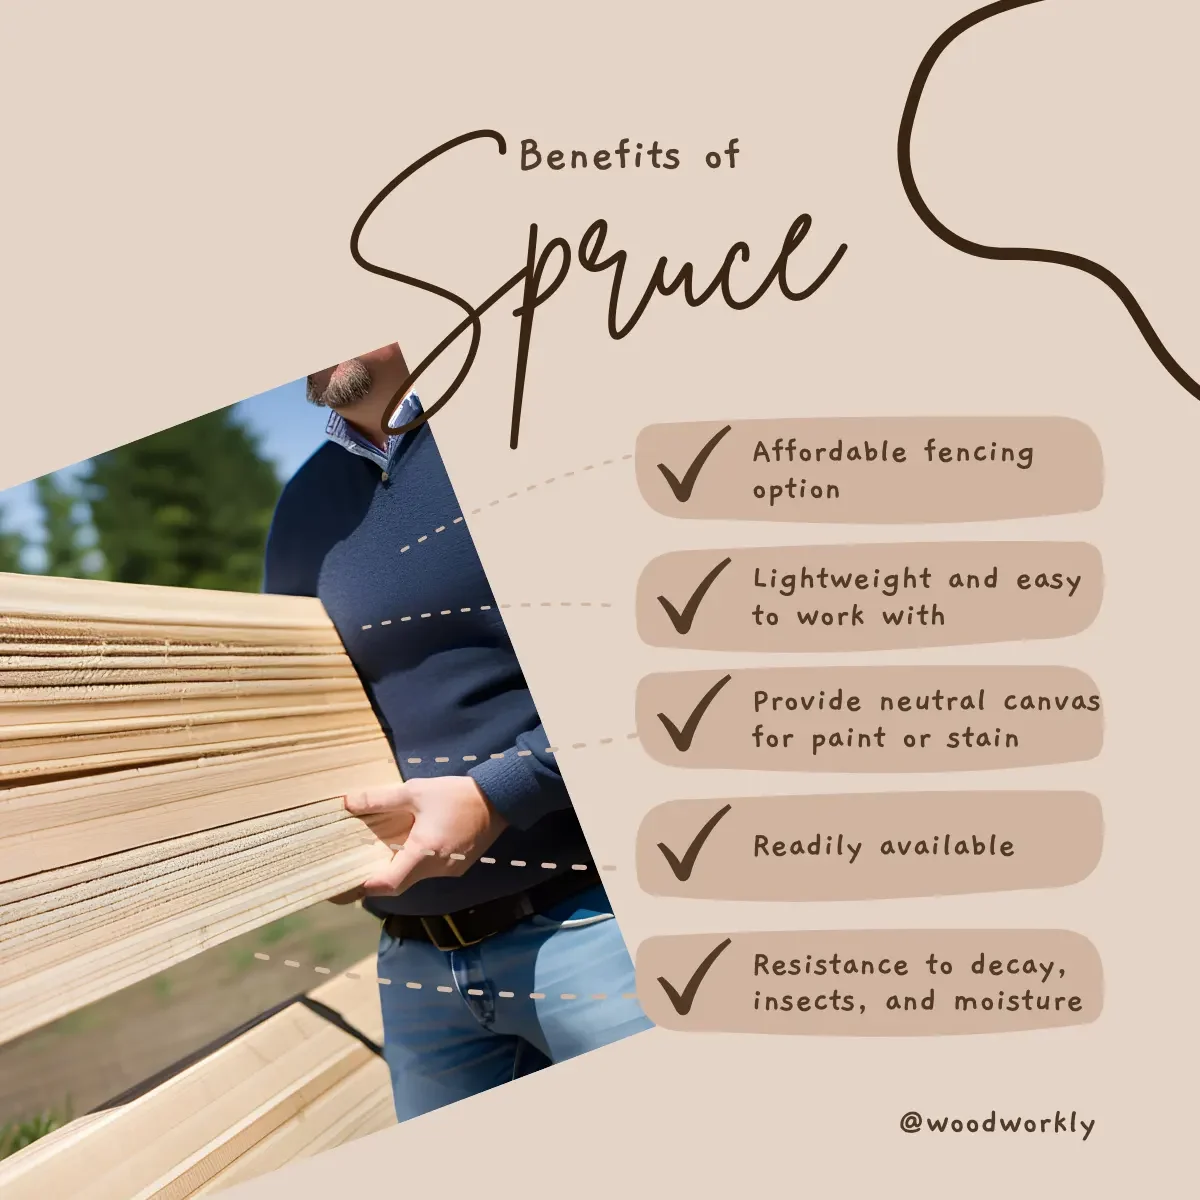 benefits of spruce wood for fencing